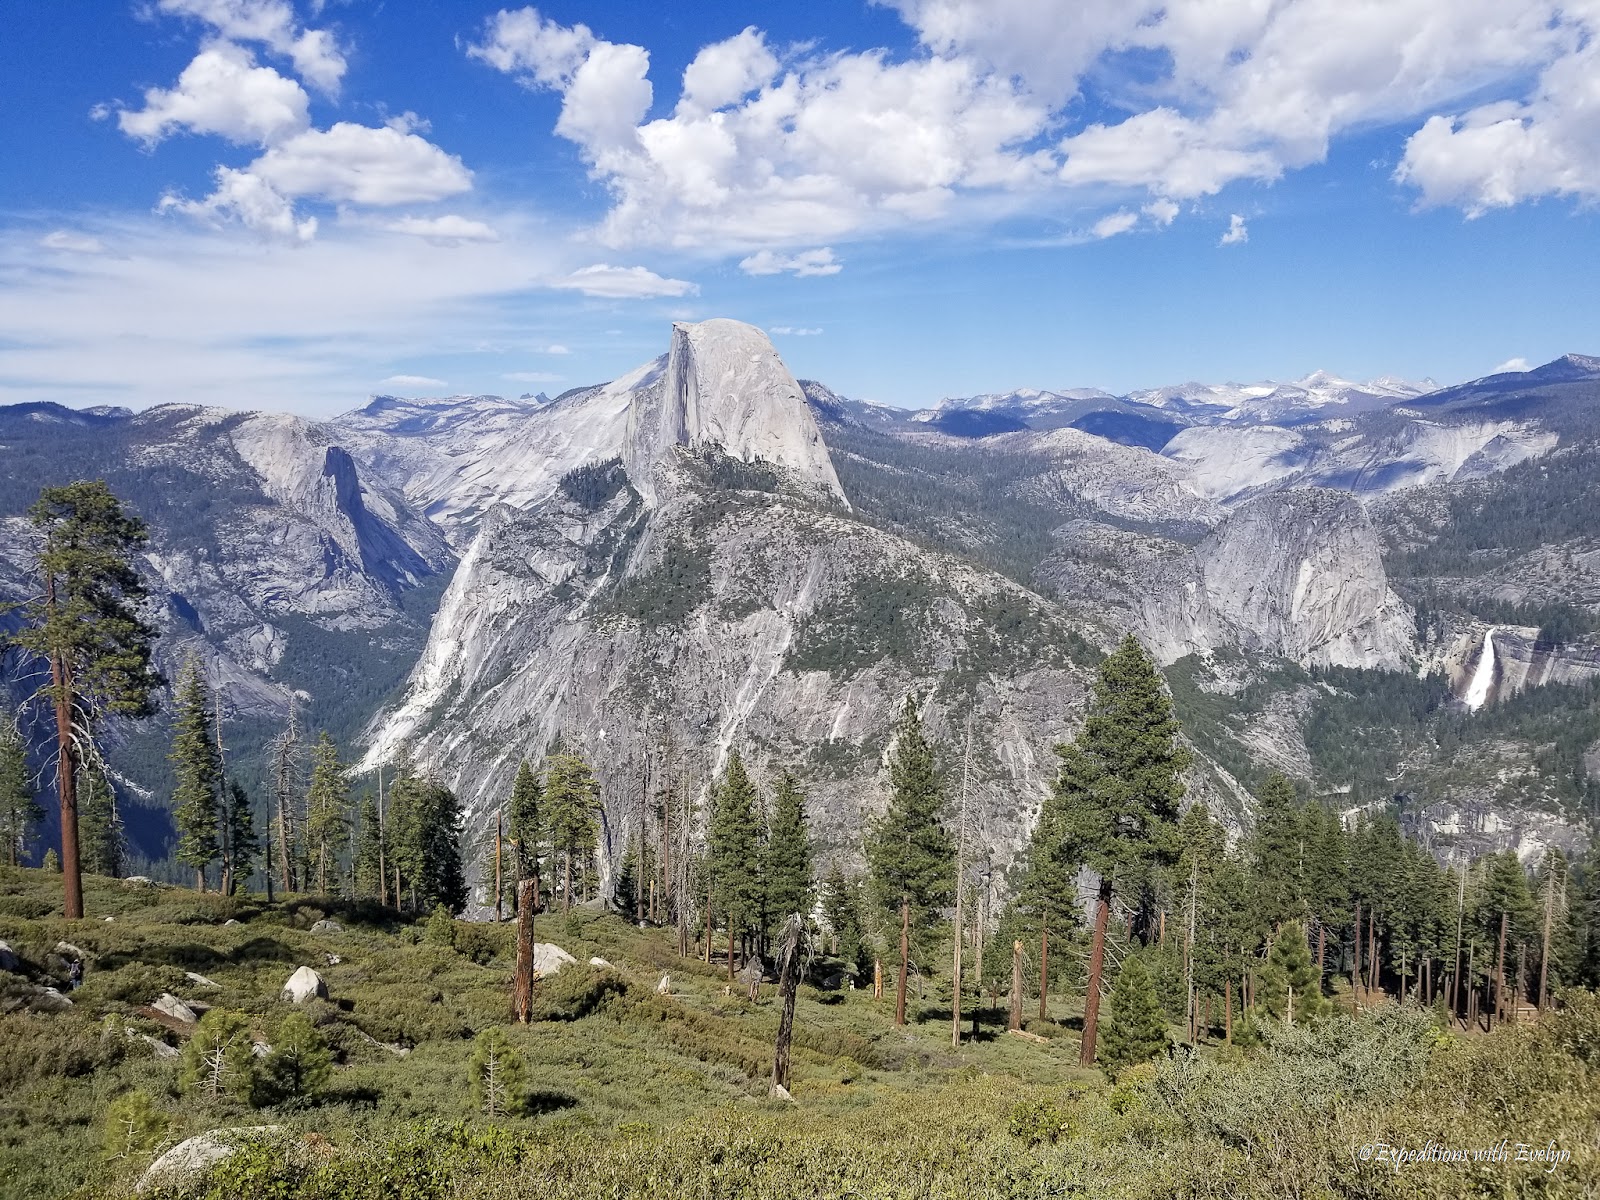 Half Dome towers above glacier-carved granite valleys with Nevada Falls in the background.  Pine trees dot the foreground.